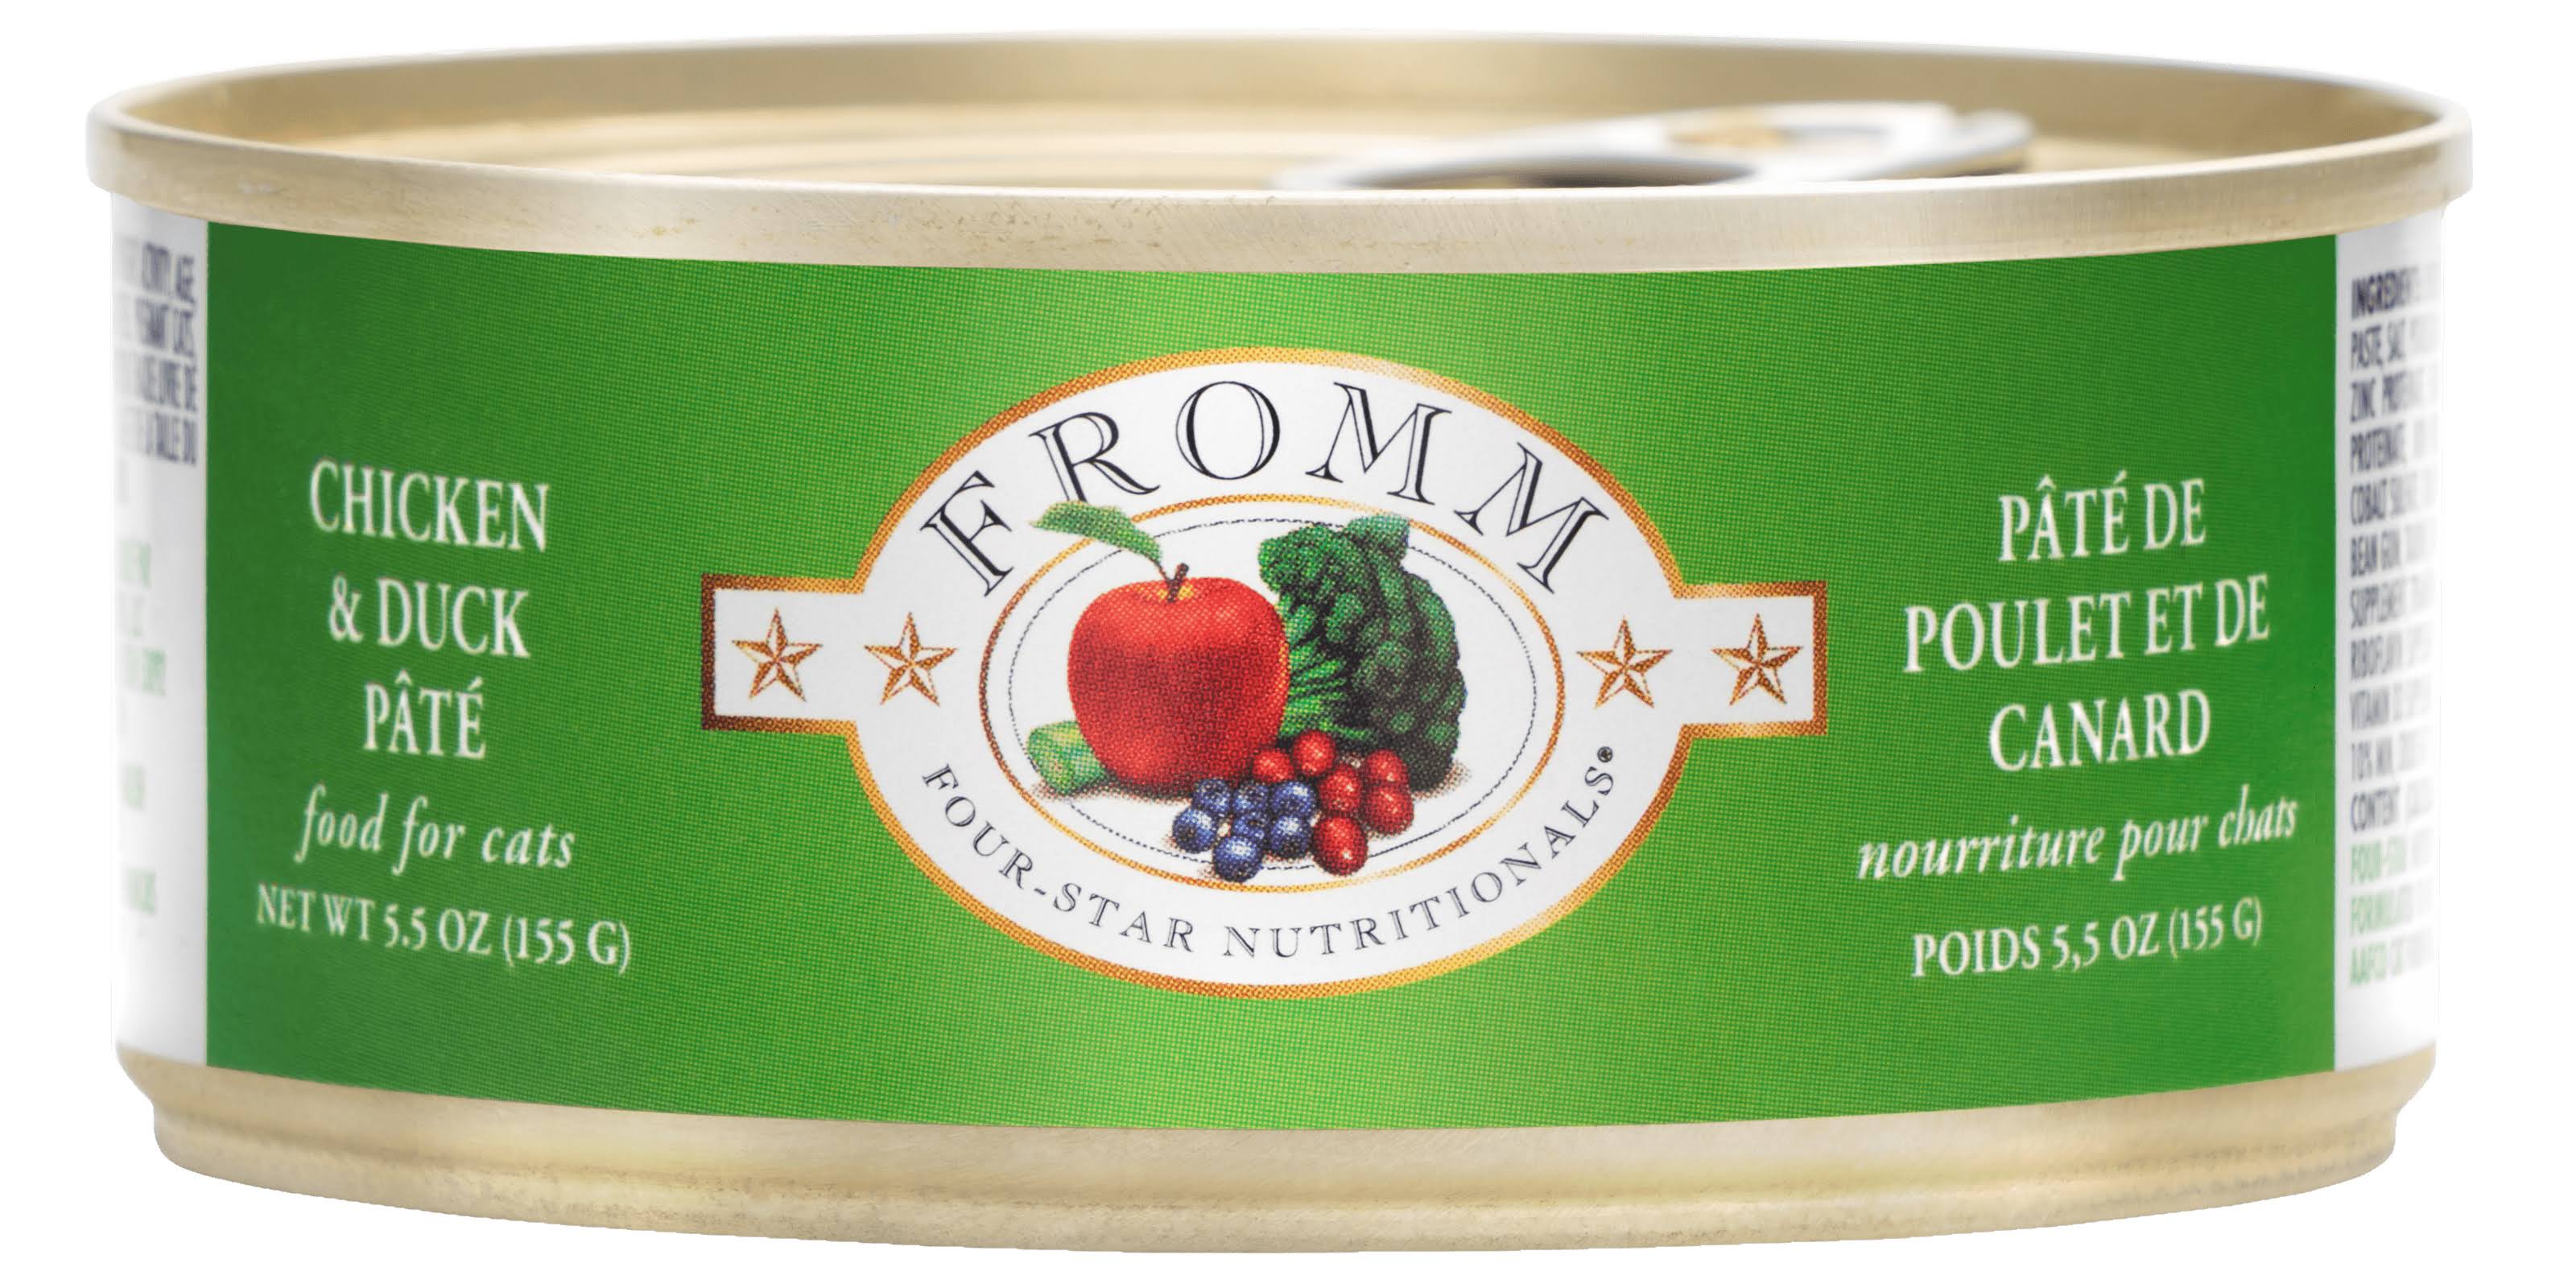 Fromm Four Star Chicken & Duck Pate Canned Cat Food 5.5 oz